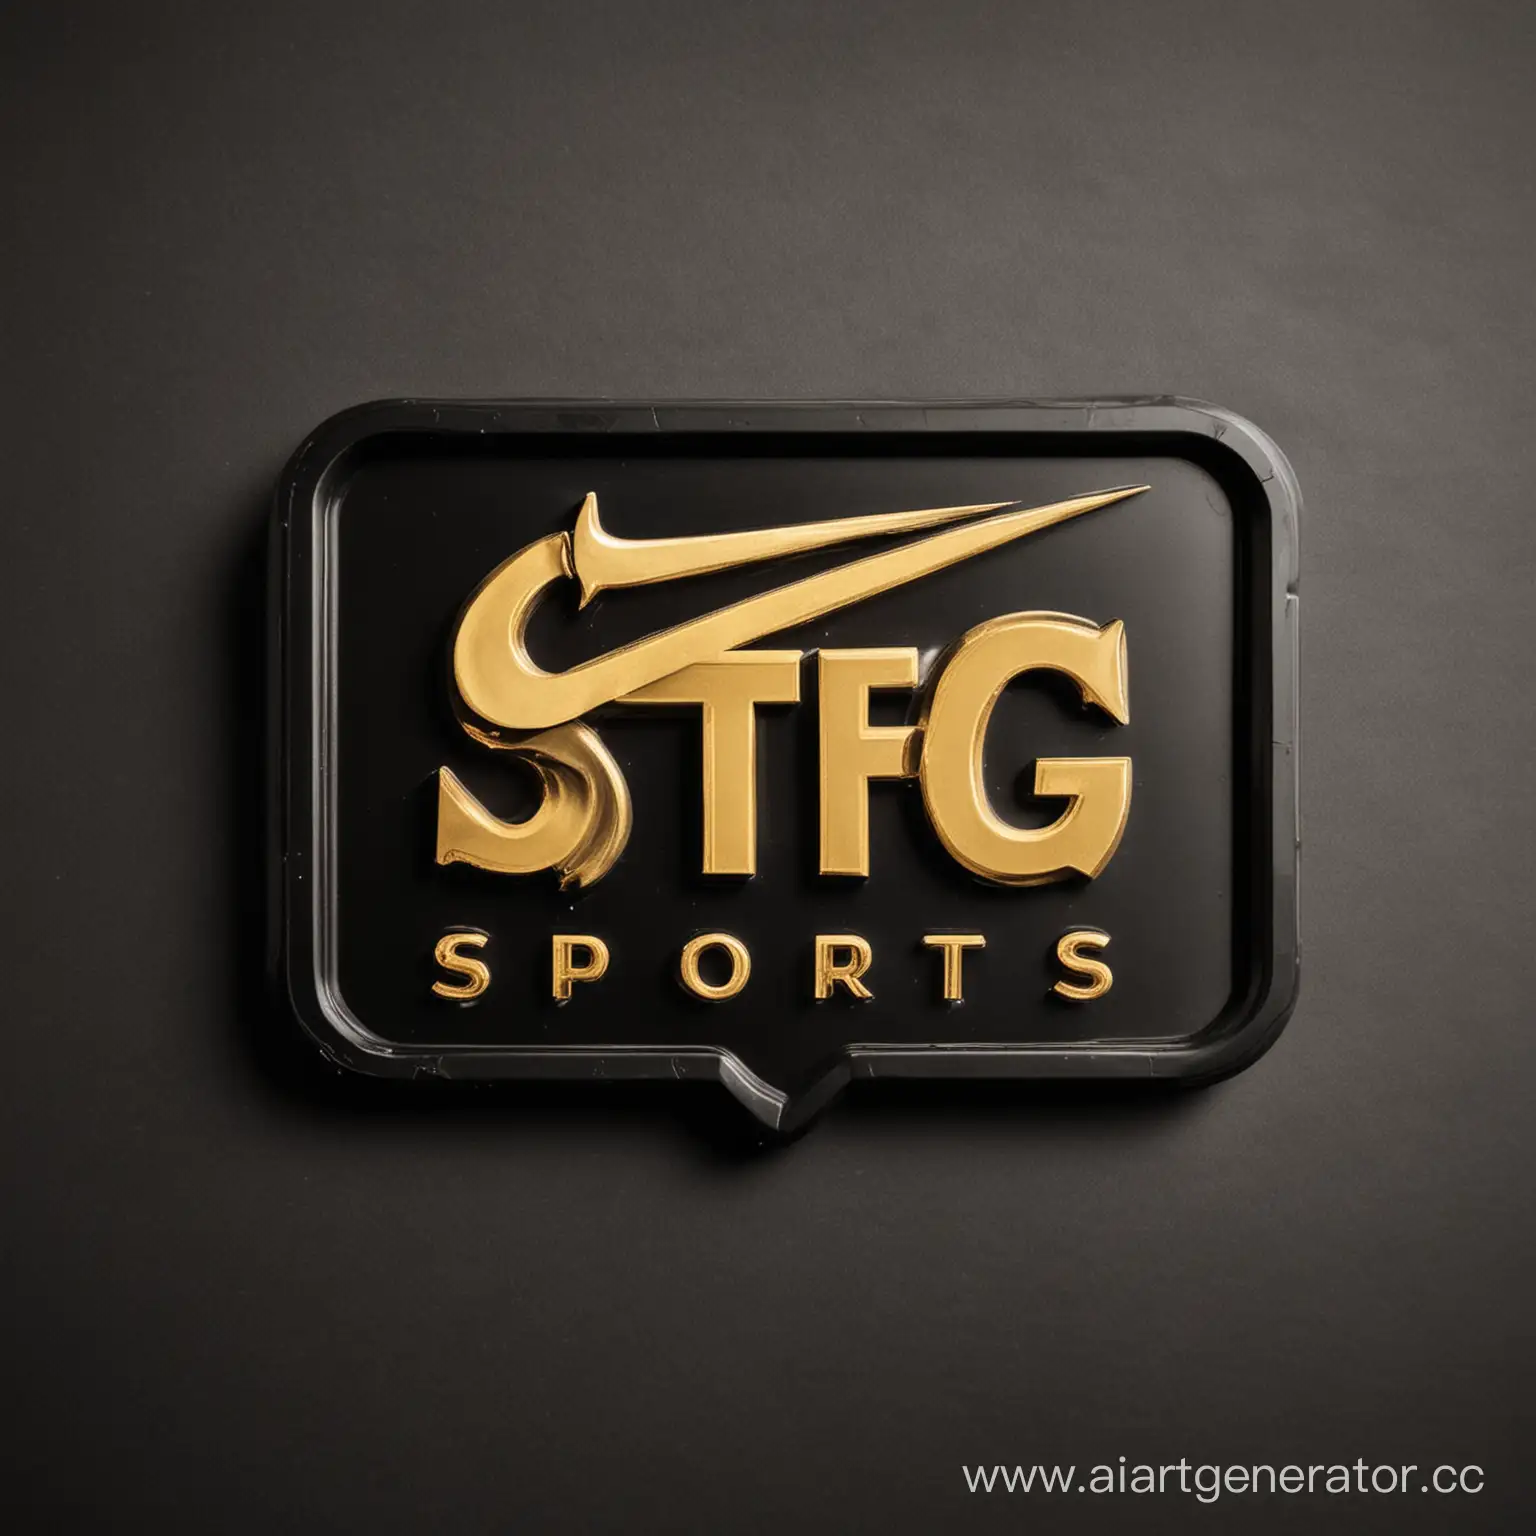 Black-and-Gold-STEG-Sports-Company-Logo-Resembling-Nike-and-Gas-Station